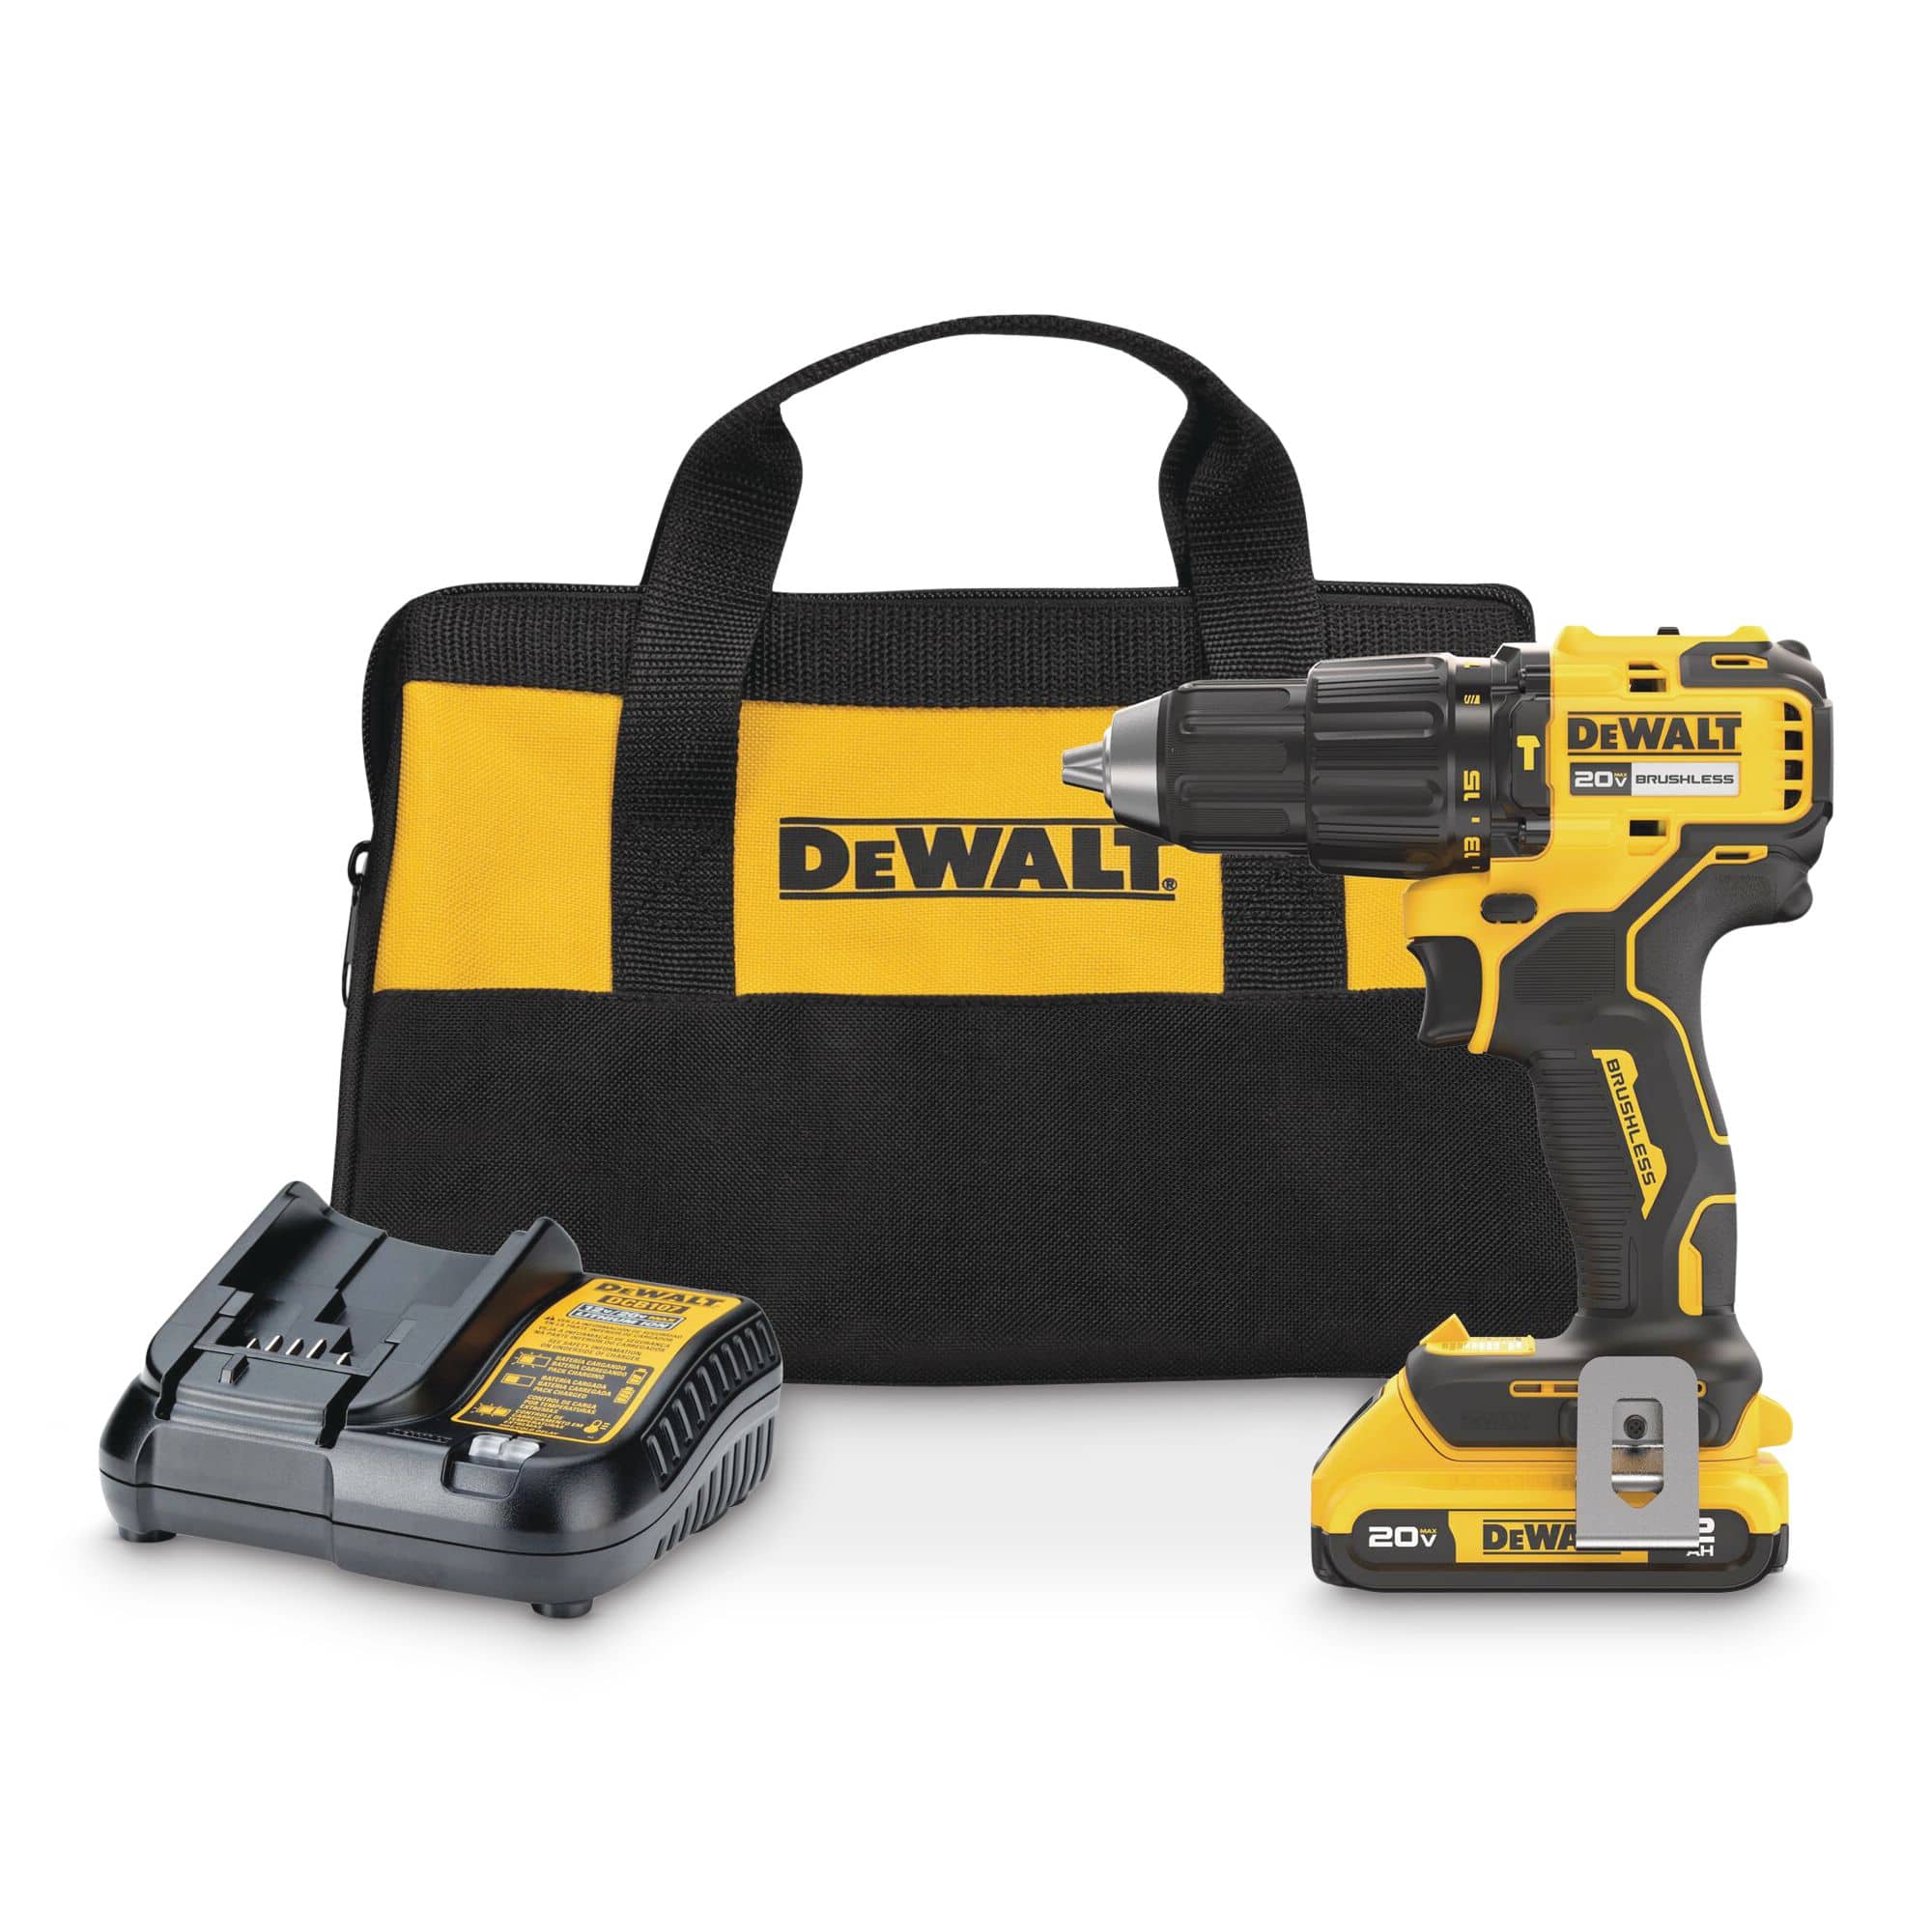 DEWALT DCD798D1 20V MAX Brushless Compact Cordless 1/2-in Hammer Drill Kit  Canadian Tire